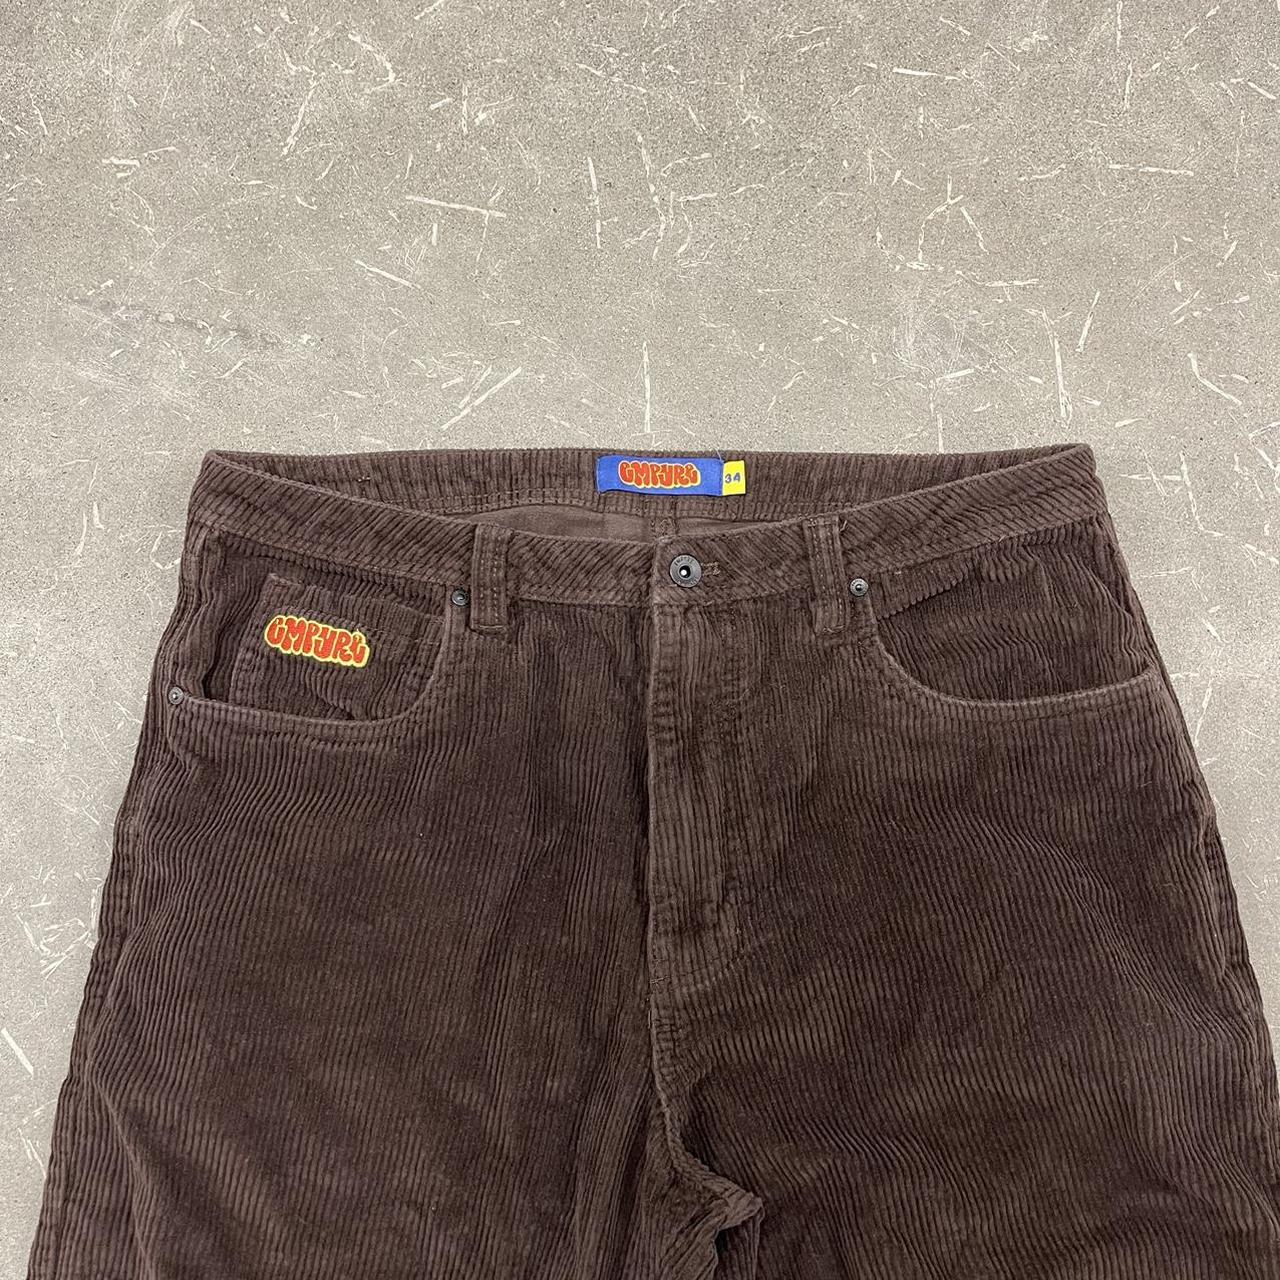 RSQ brown corduroy high waisted pants. Size 1/25”. - Depop